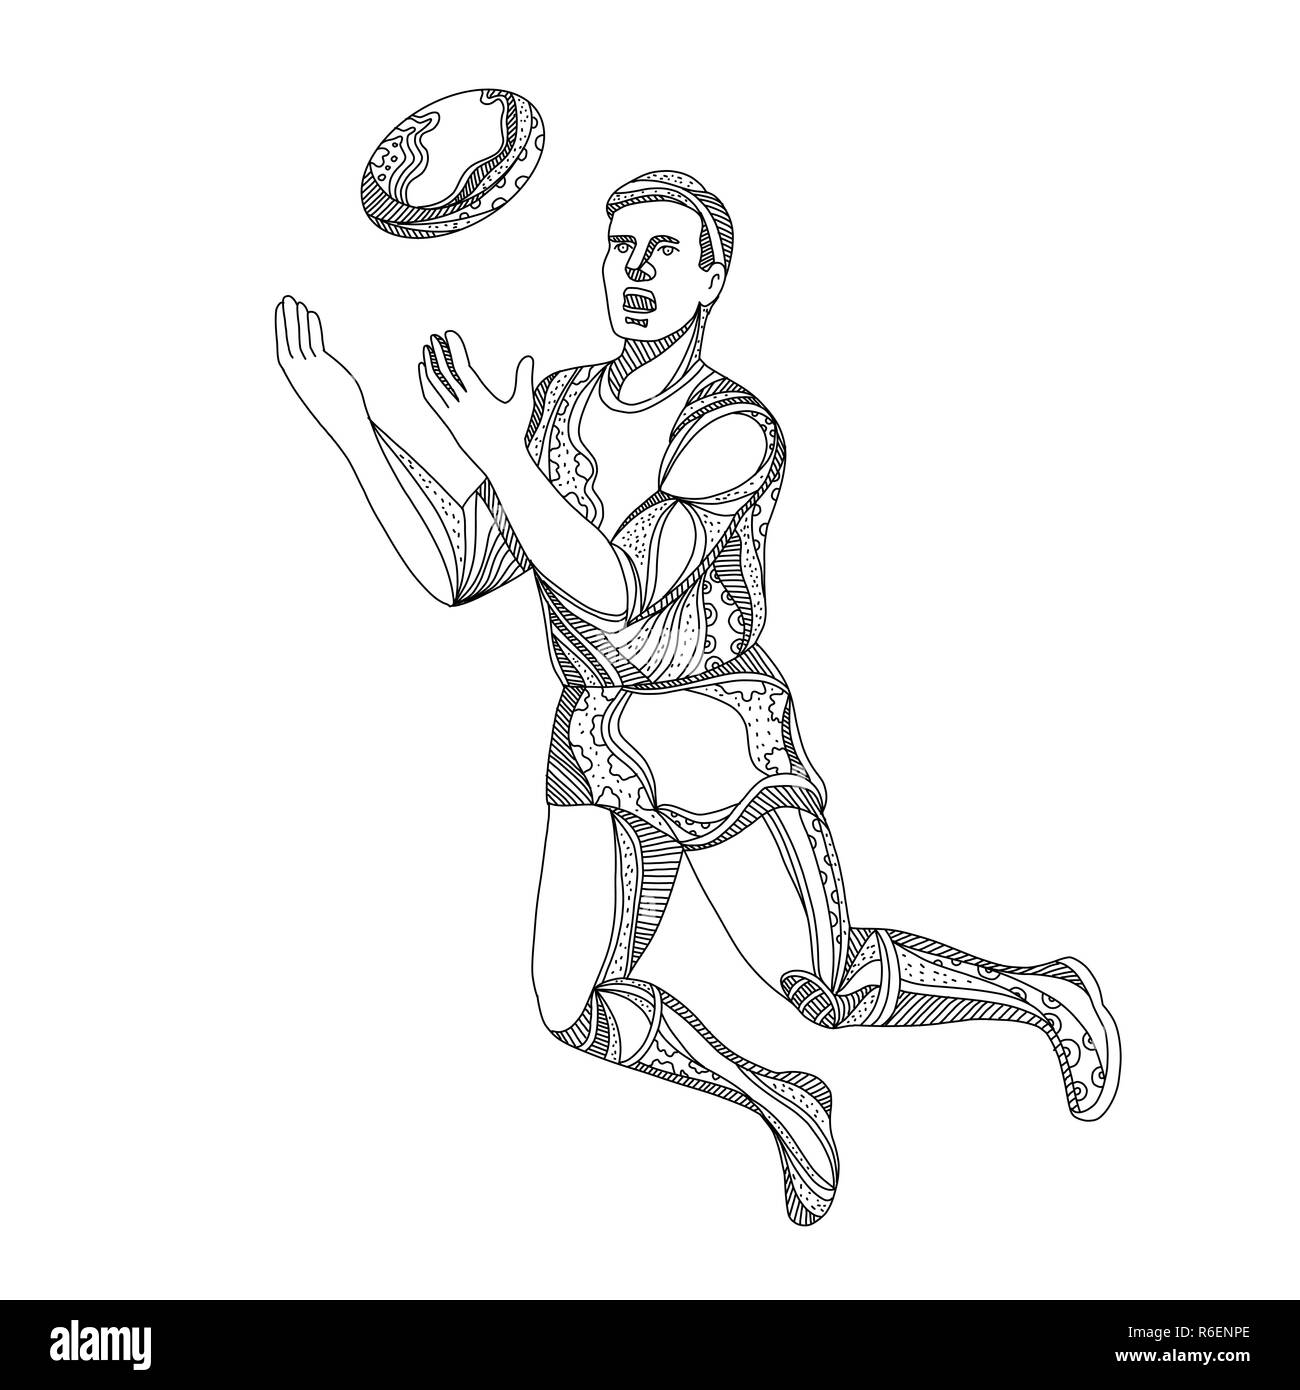 Aussie Rules Football Player Jumping Doodle Banque D'Images